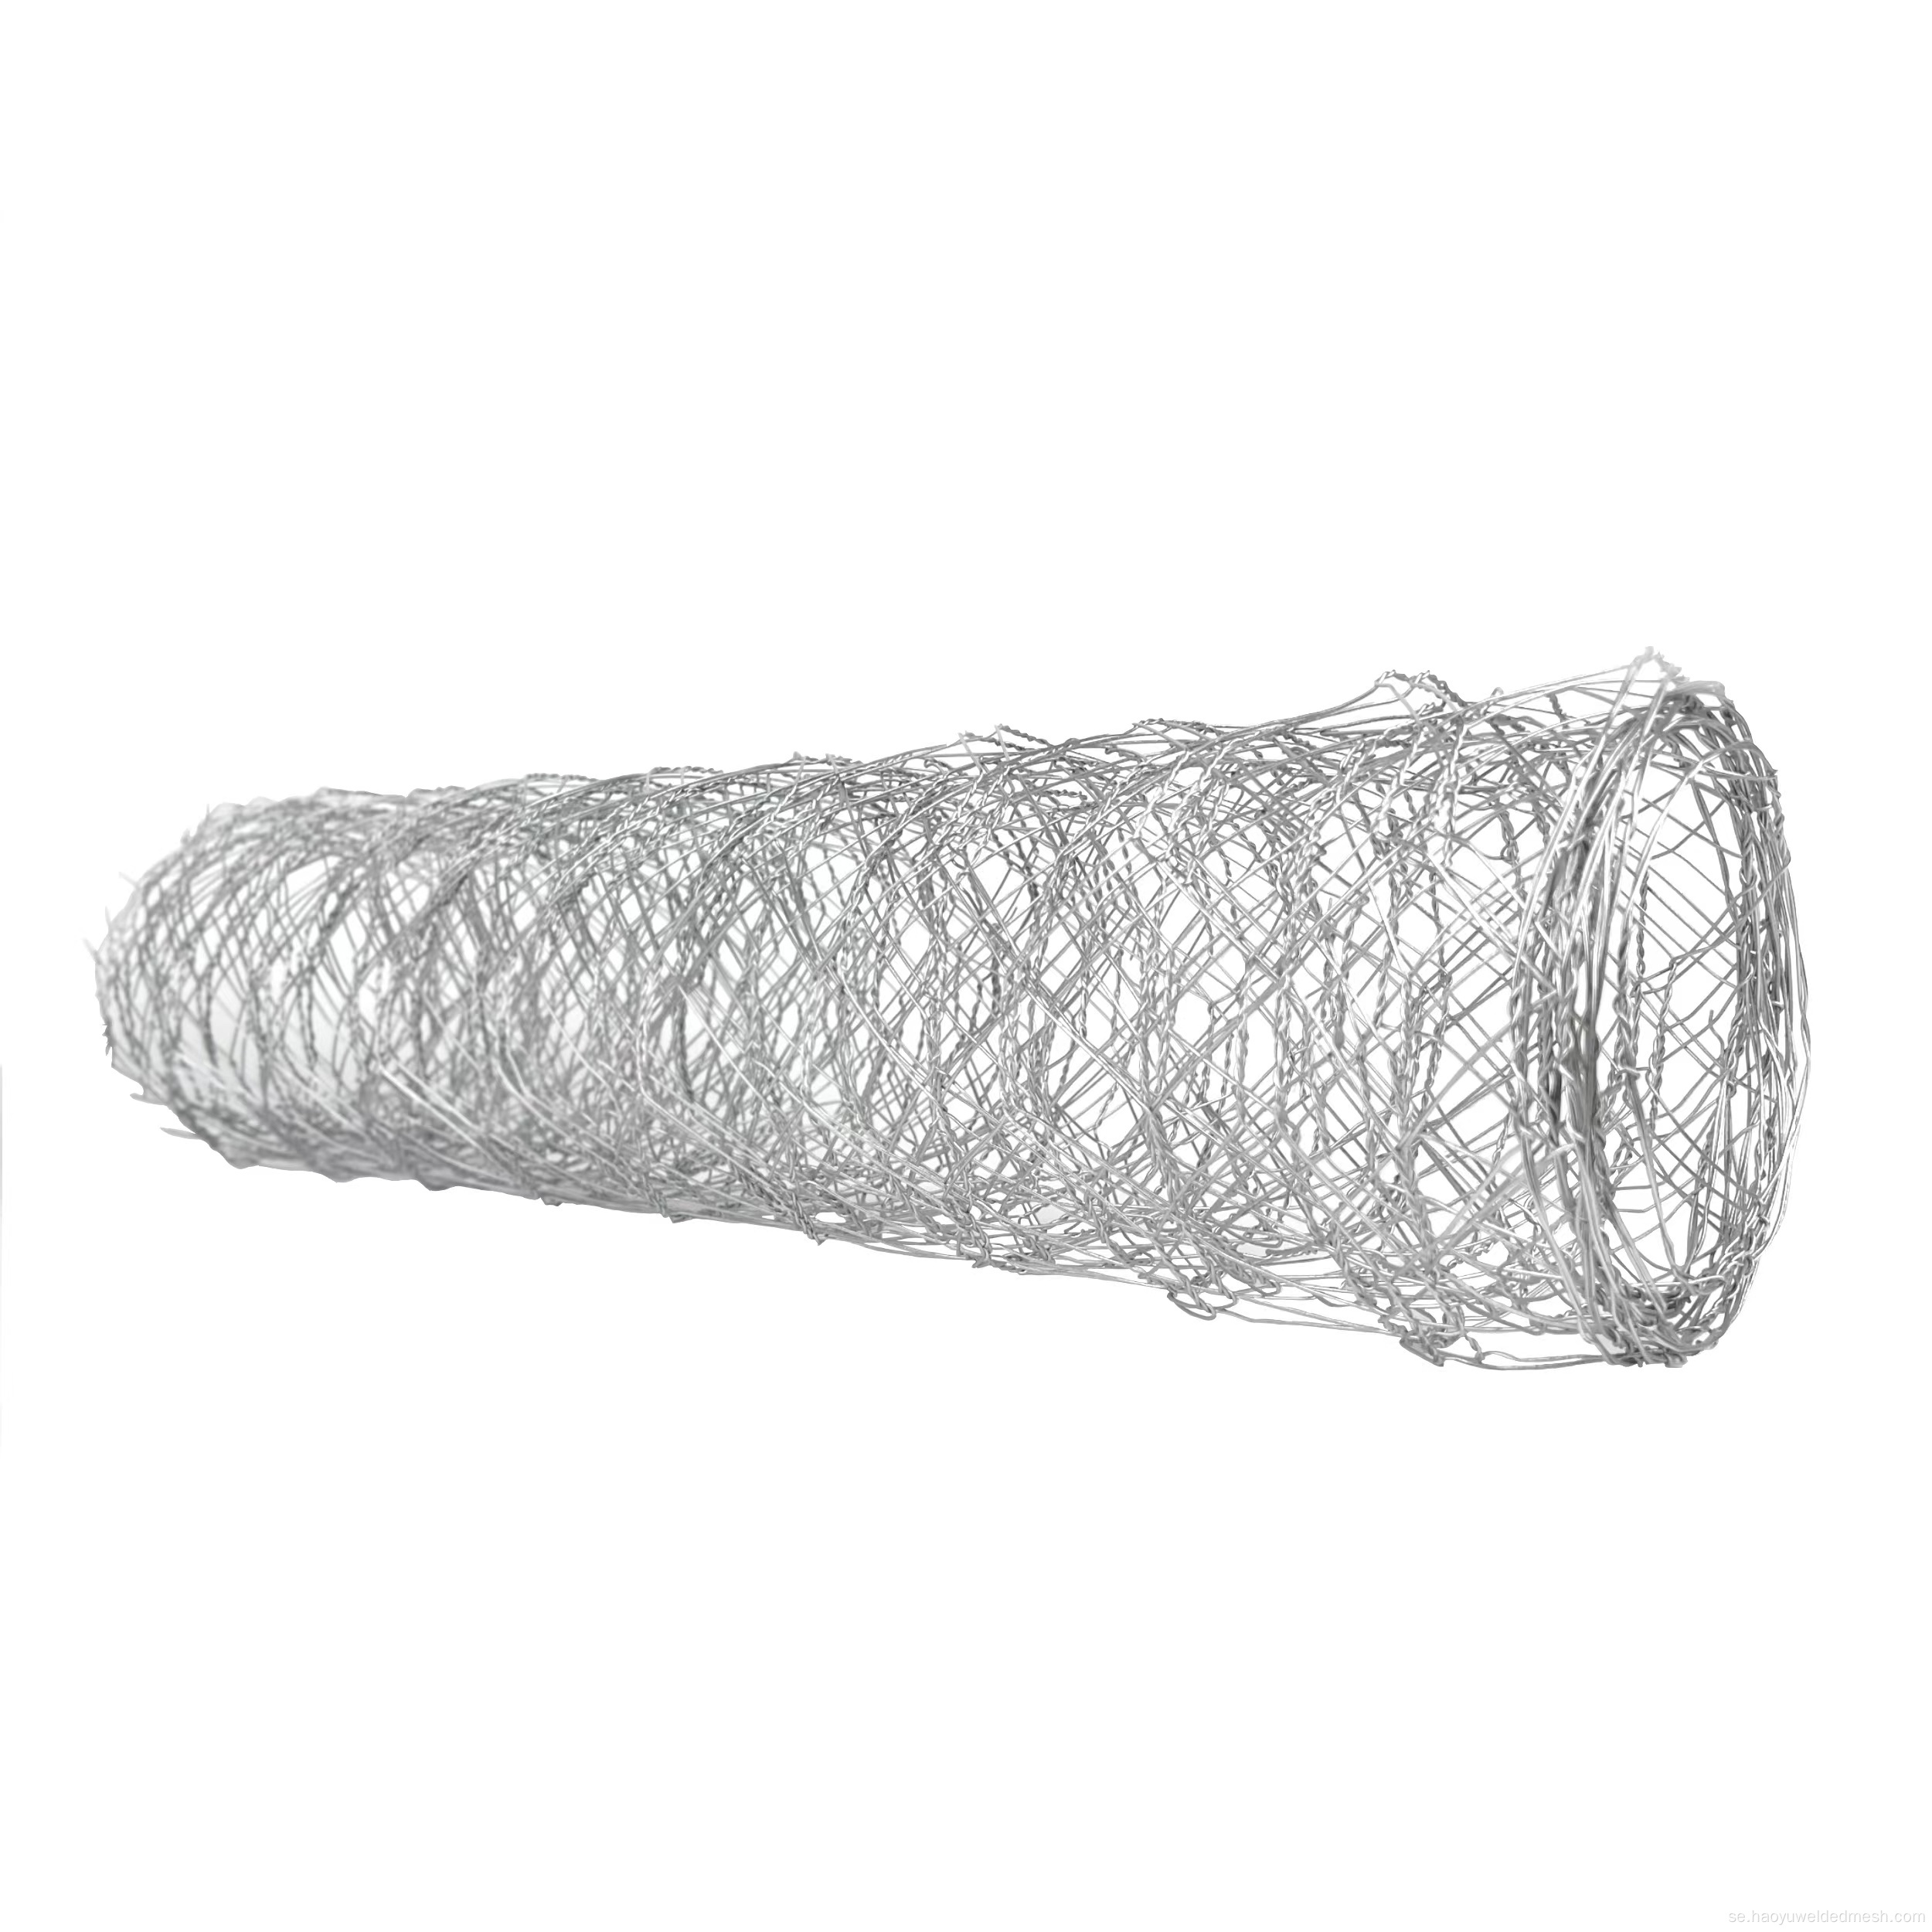 Flyover Safety Protection Hook Mesh Anchor Mesh